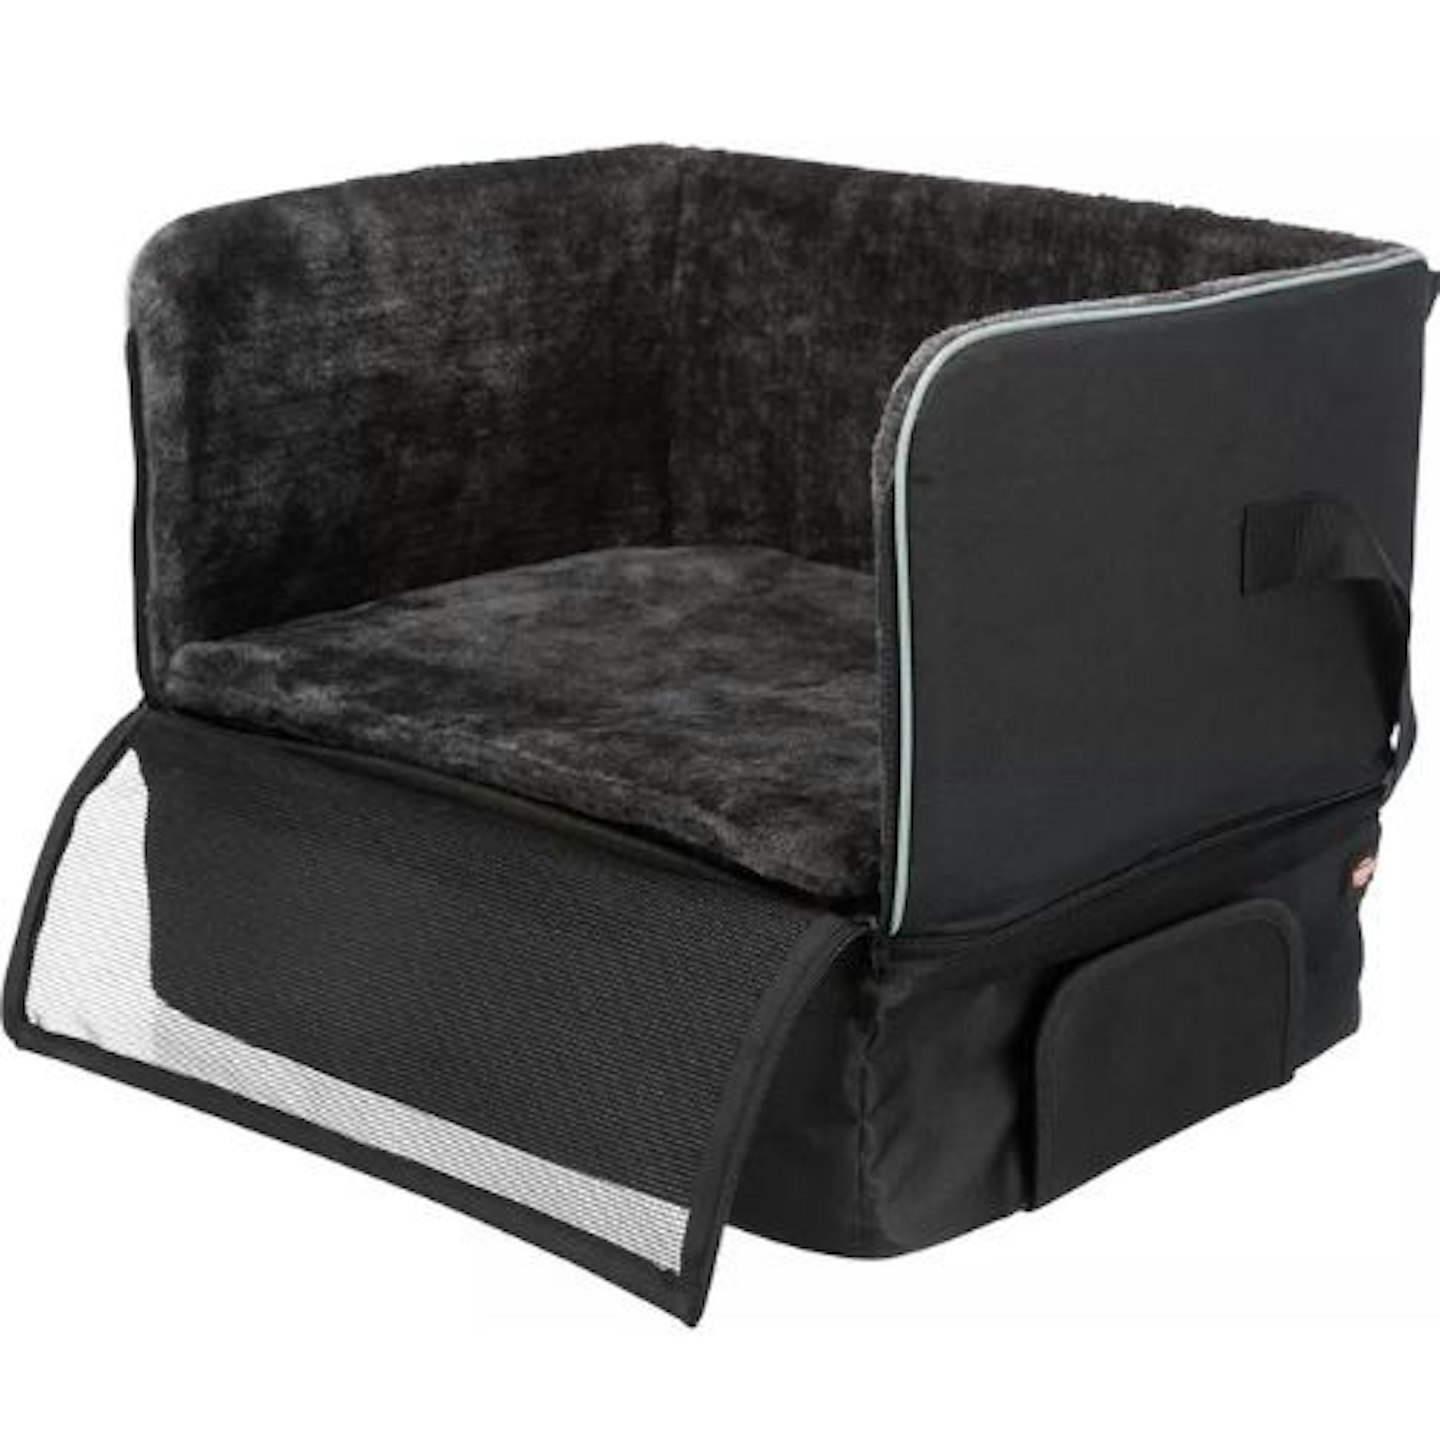 Trixie Car Seat for Dogs